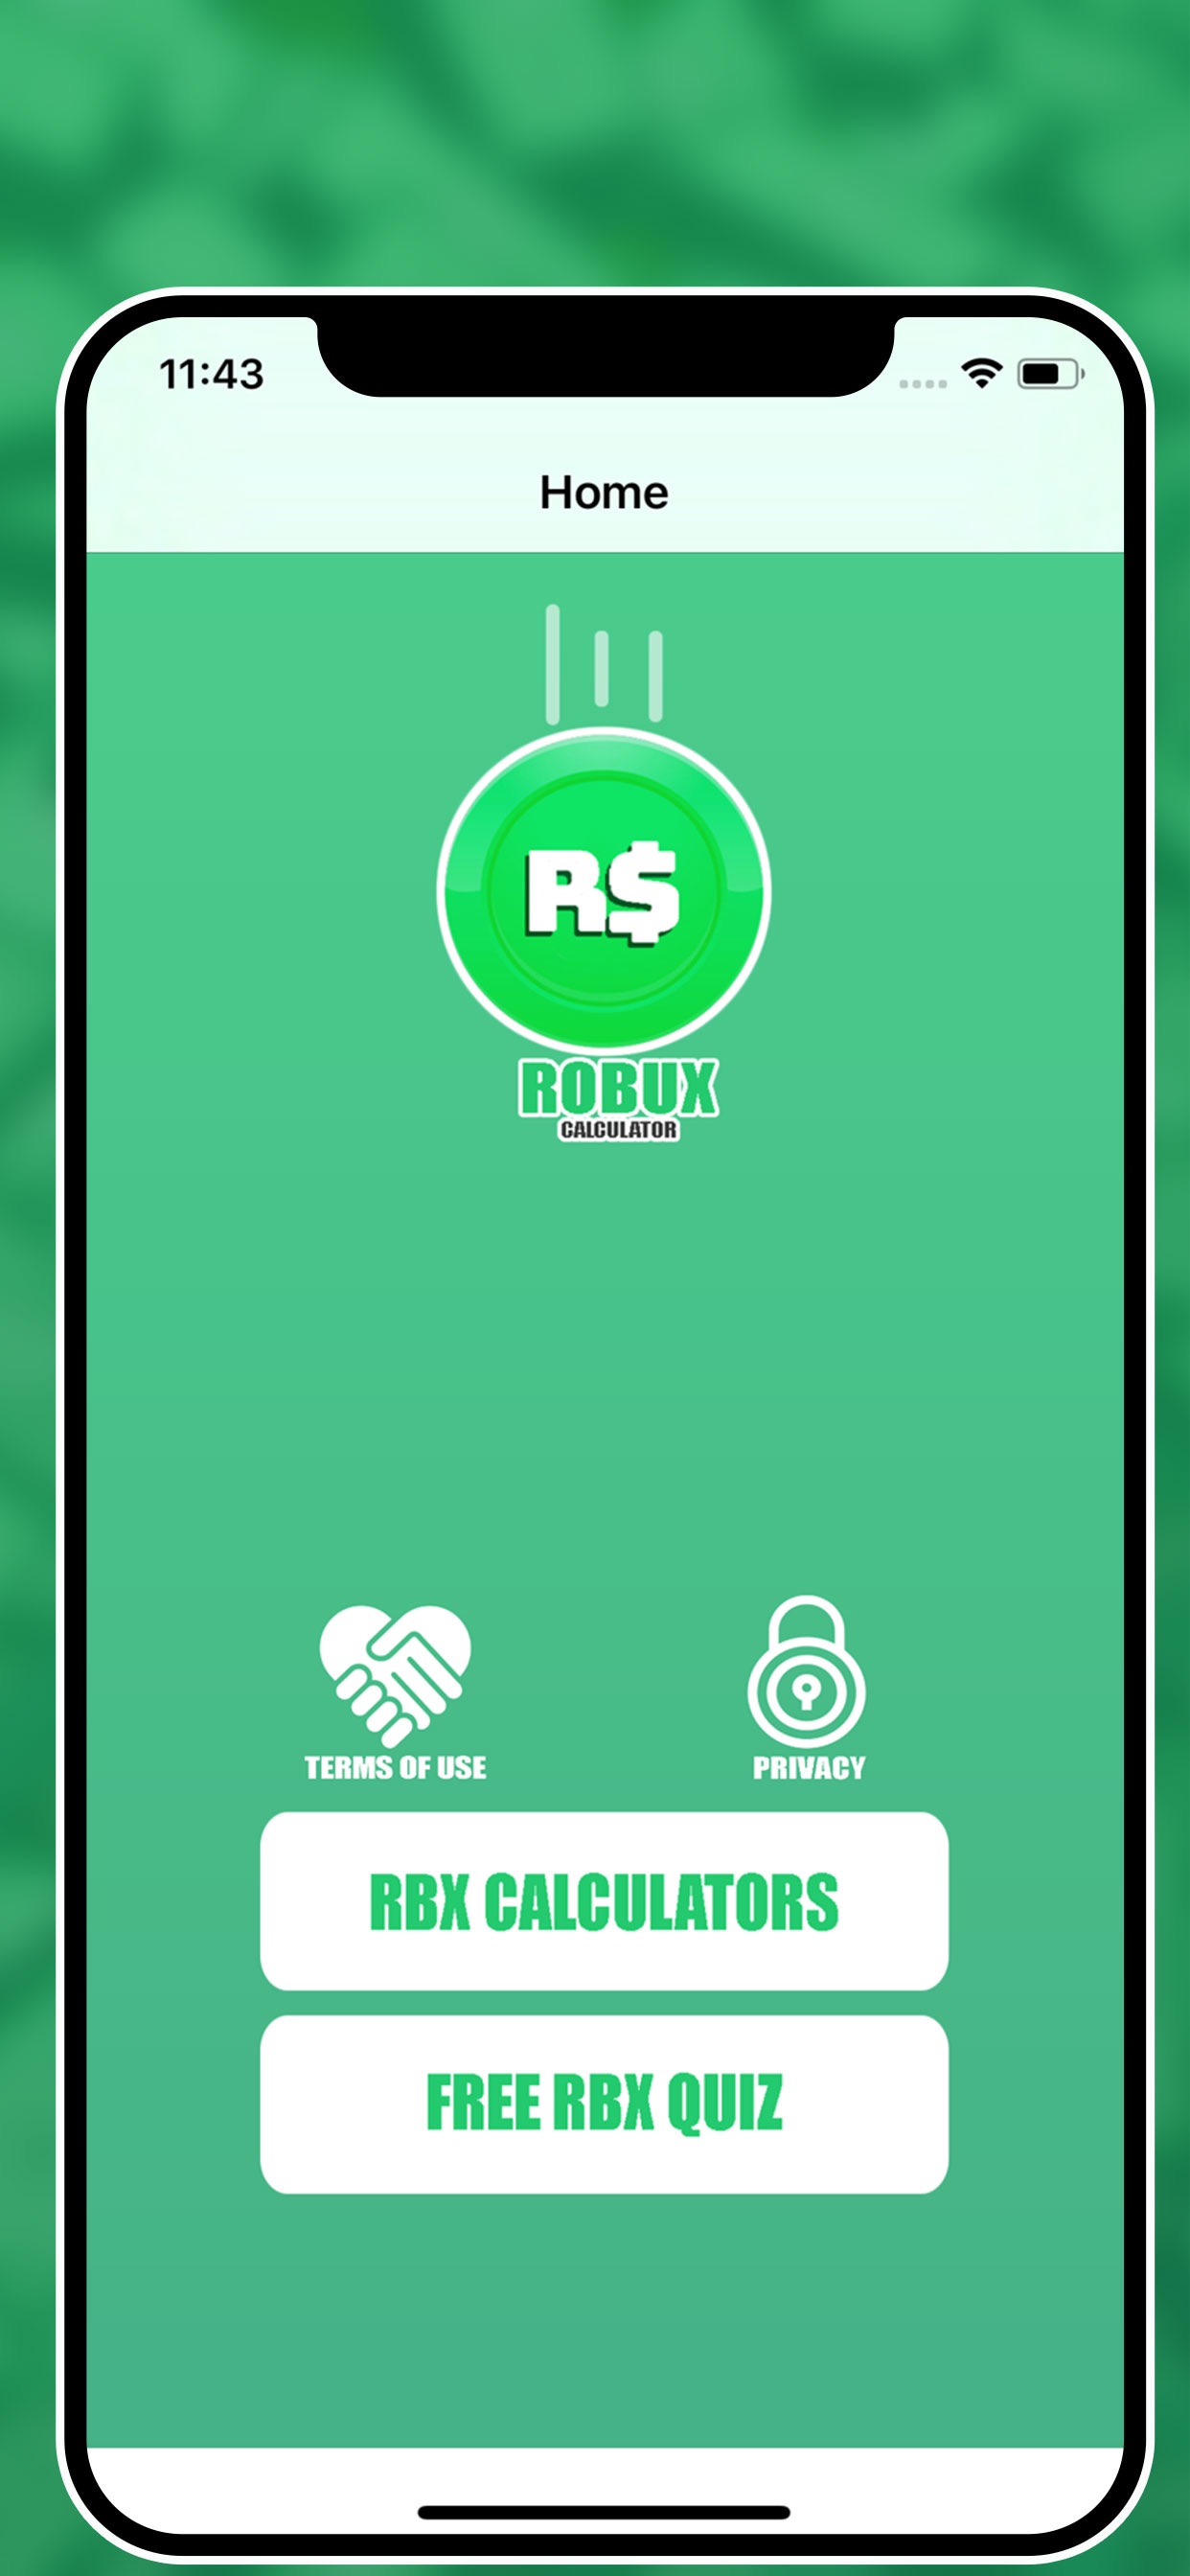 Robux Calculator For Rblox App Store Review Aso Revenue Downloads Appfollow - total robux caculater how to get robux fast no hack 2018